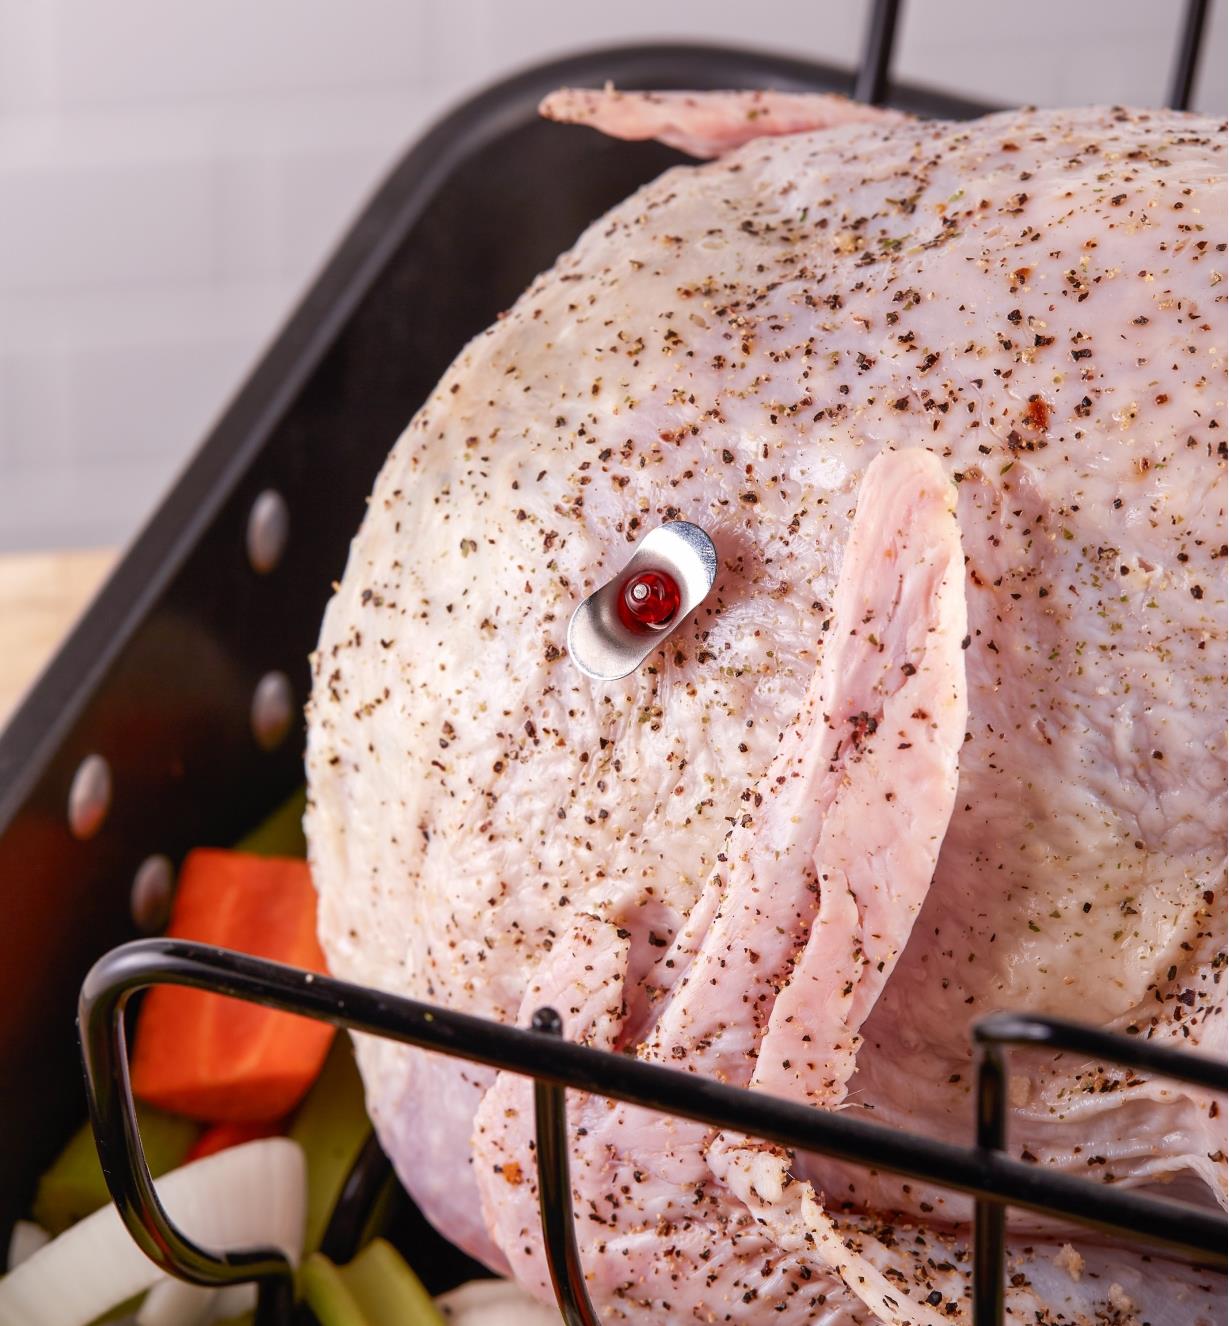 The reusable pop-up turkey timer is inserted in the thickest part of the breast of an uncooked turkey